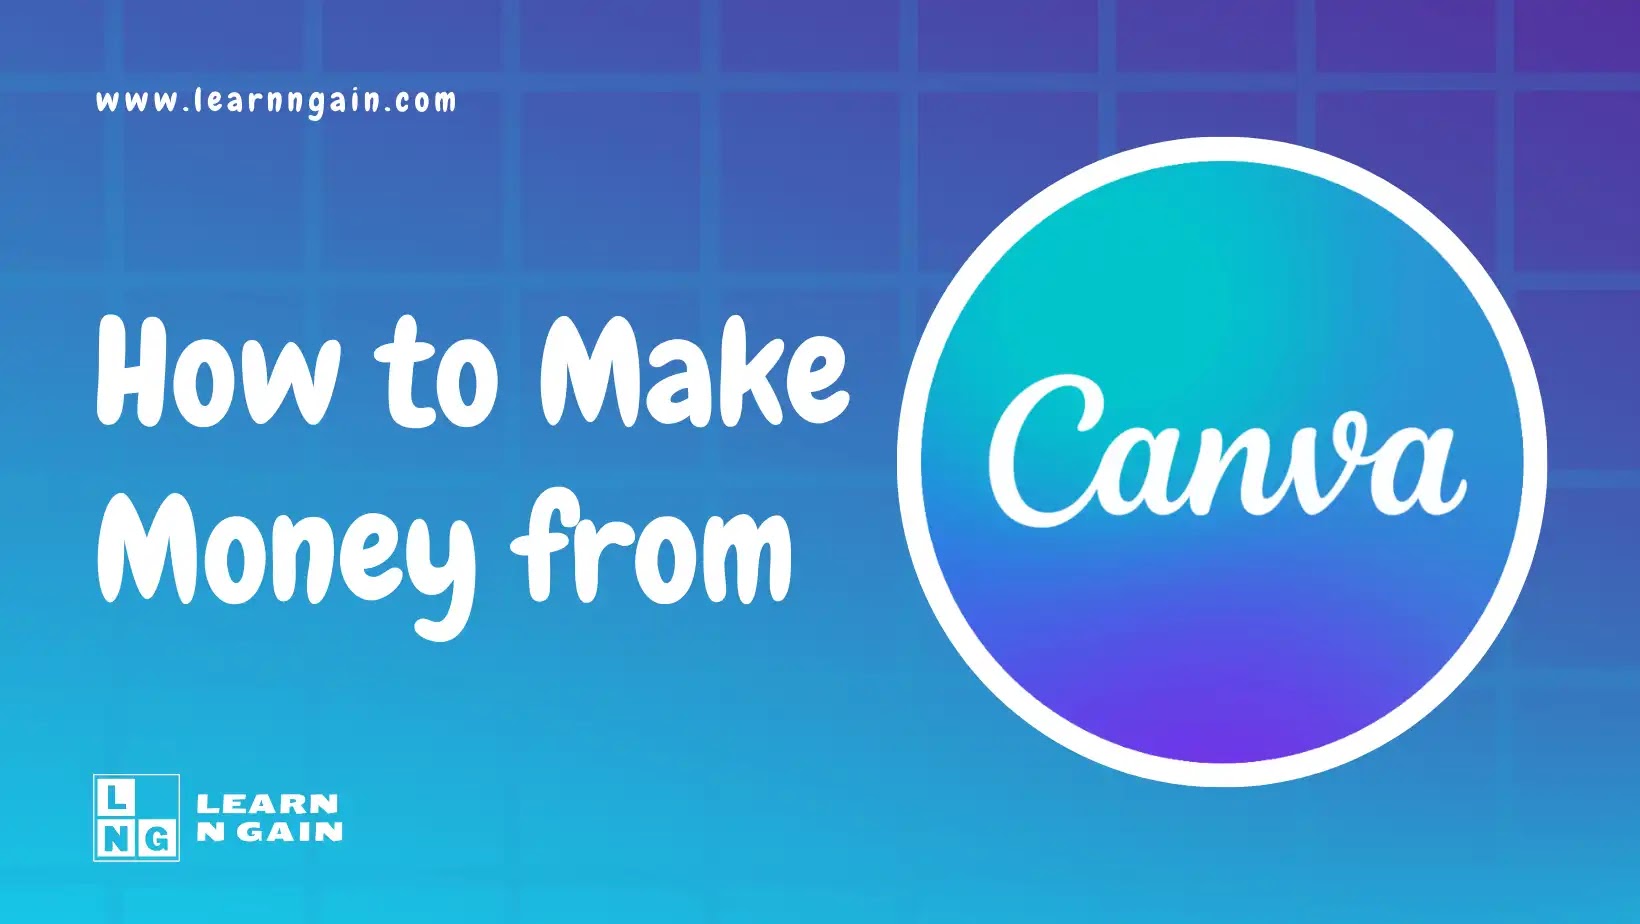 How to Make Money from Canva